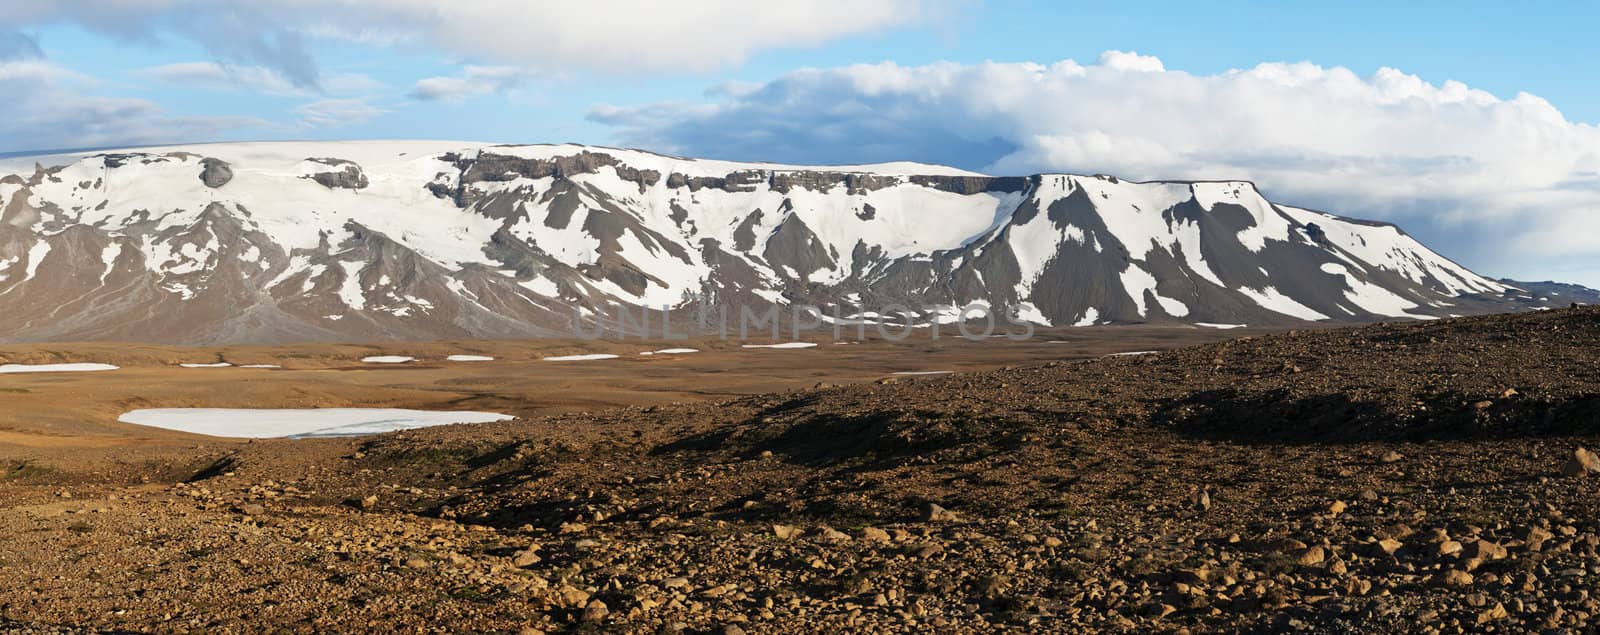 Mountains on Iceland by fyletto